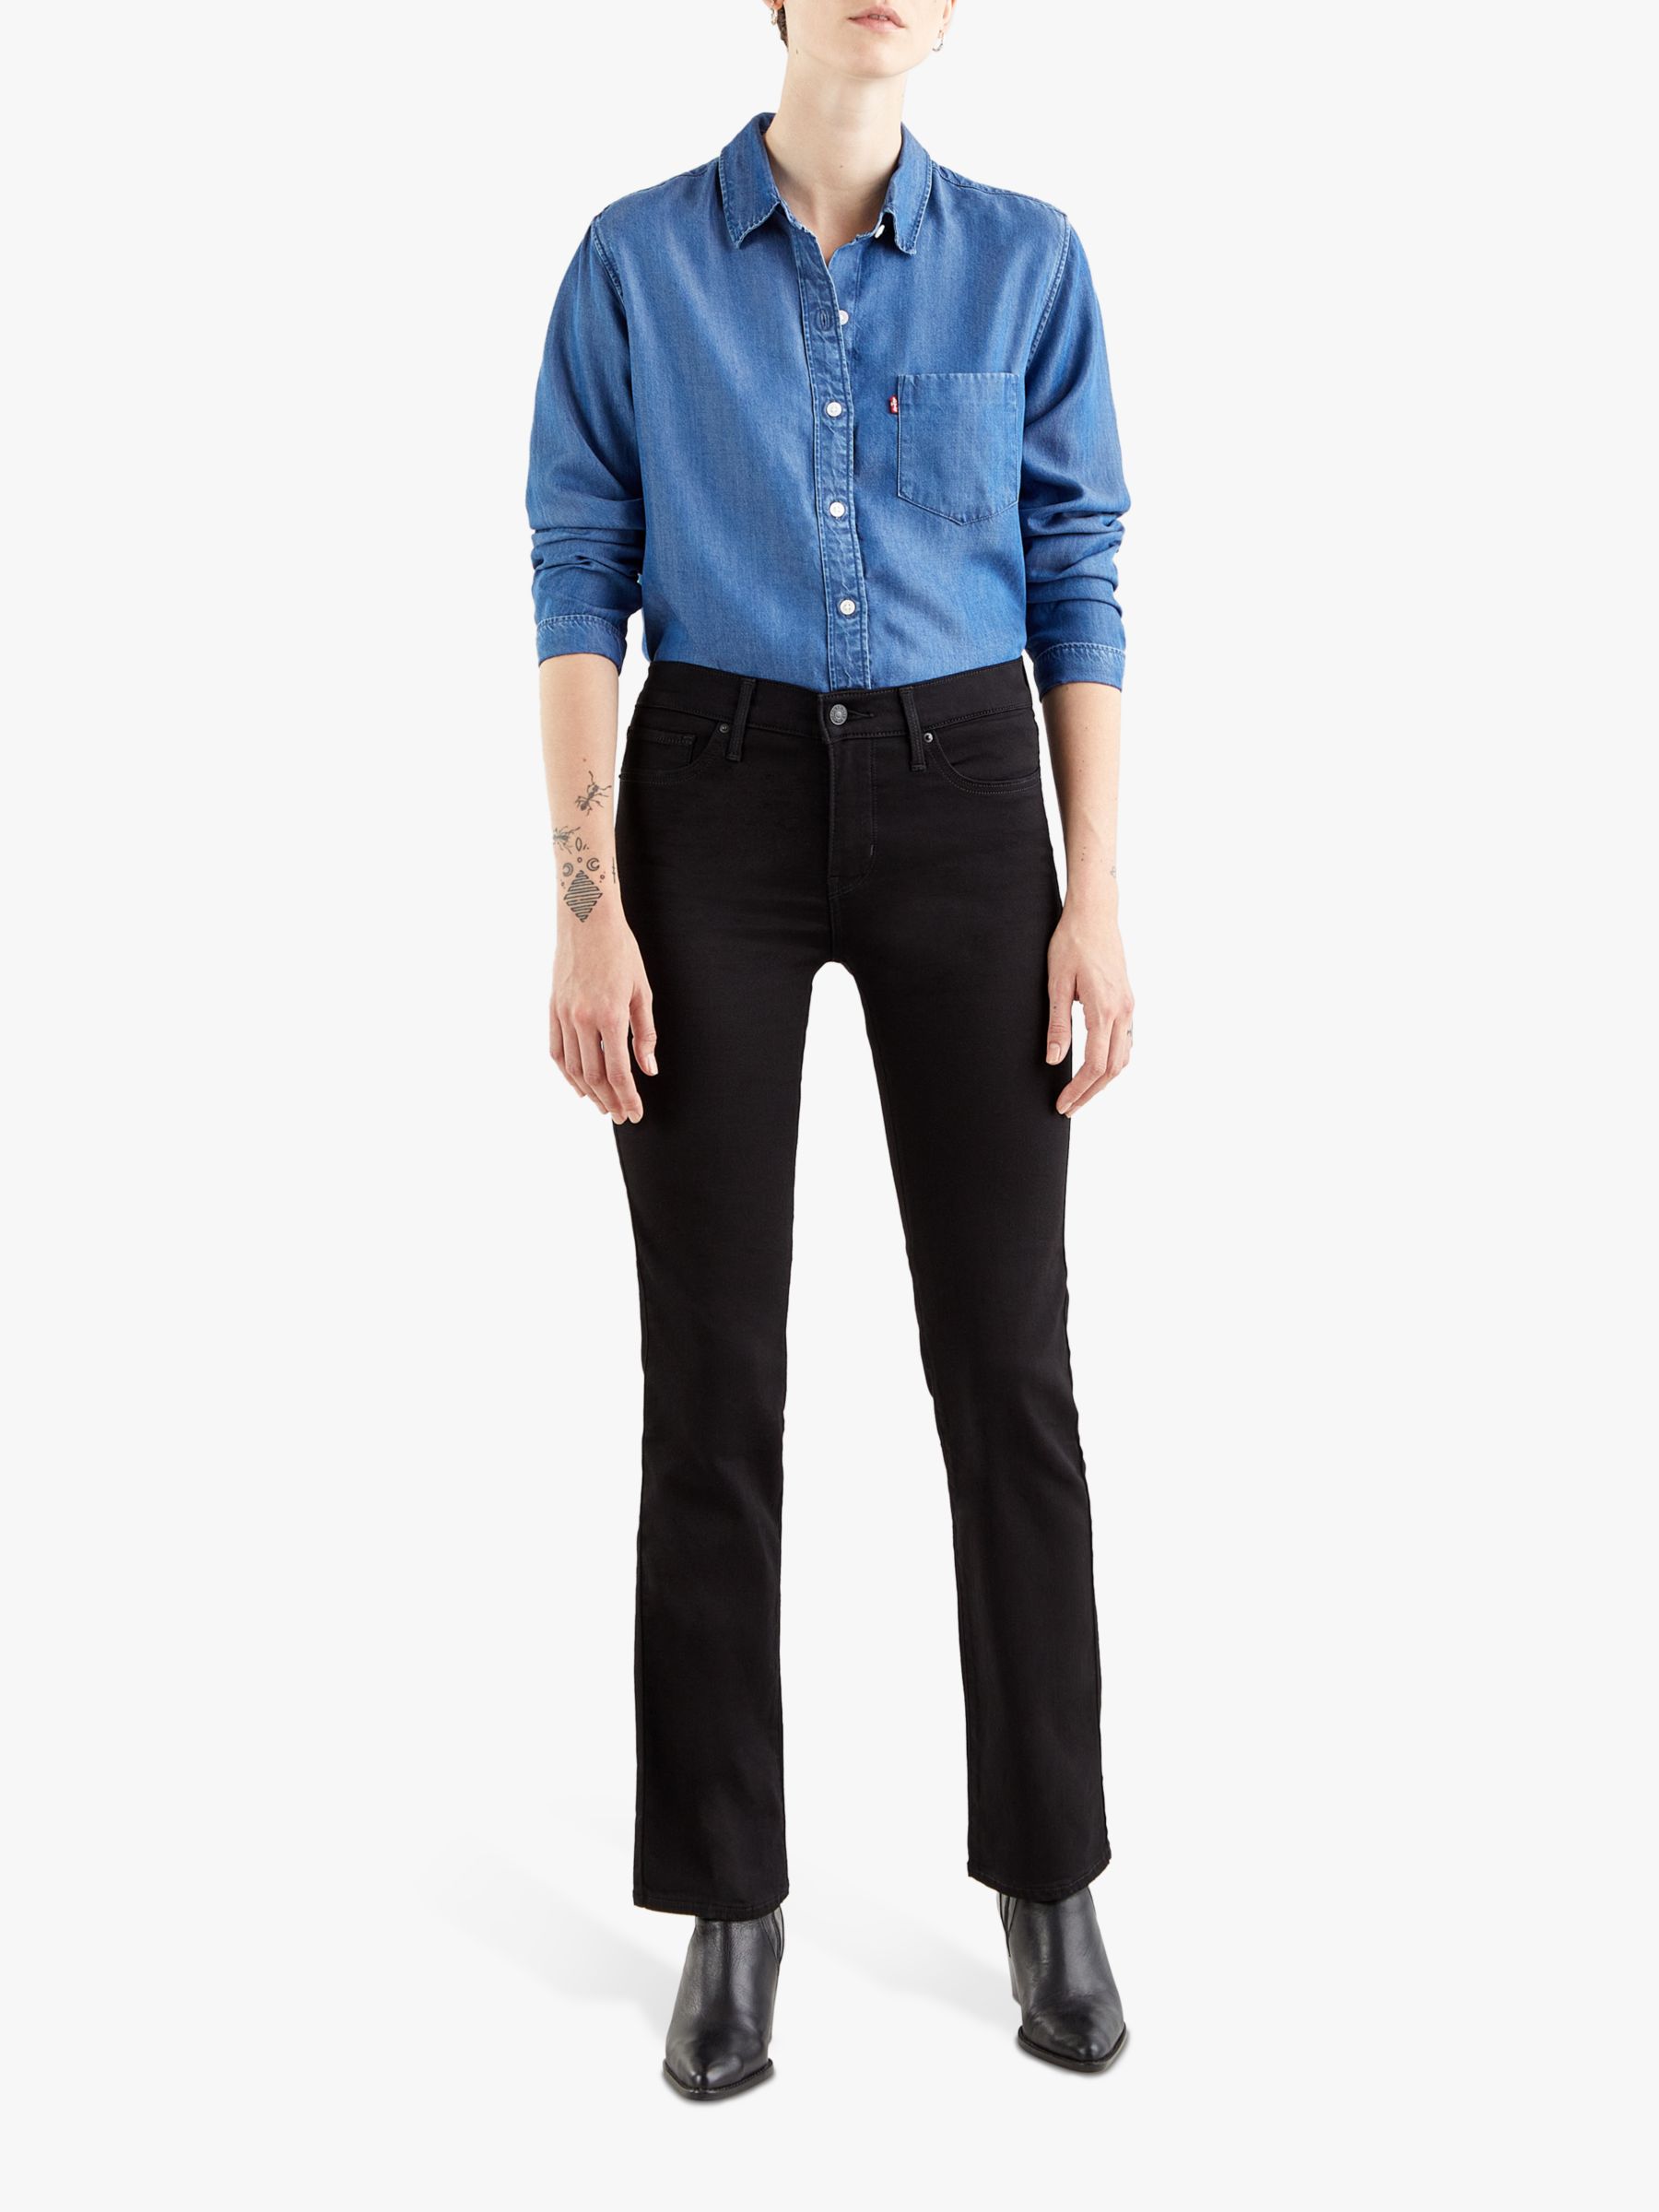 Buy Levi's 314 Shaping Straight Jeans, Soft Black Online at johnlewis.com